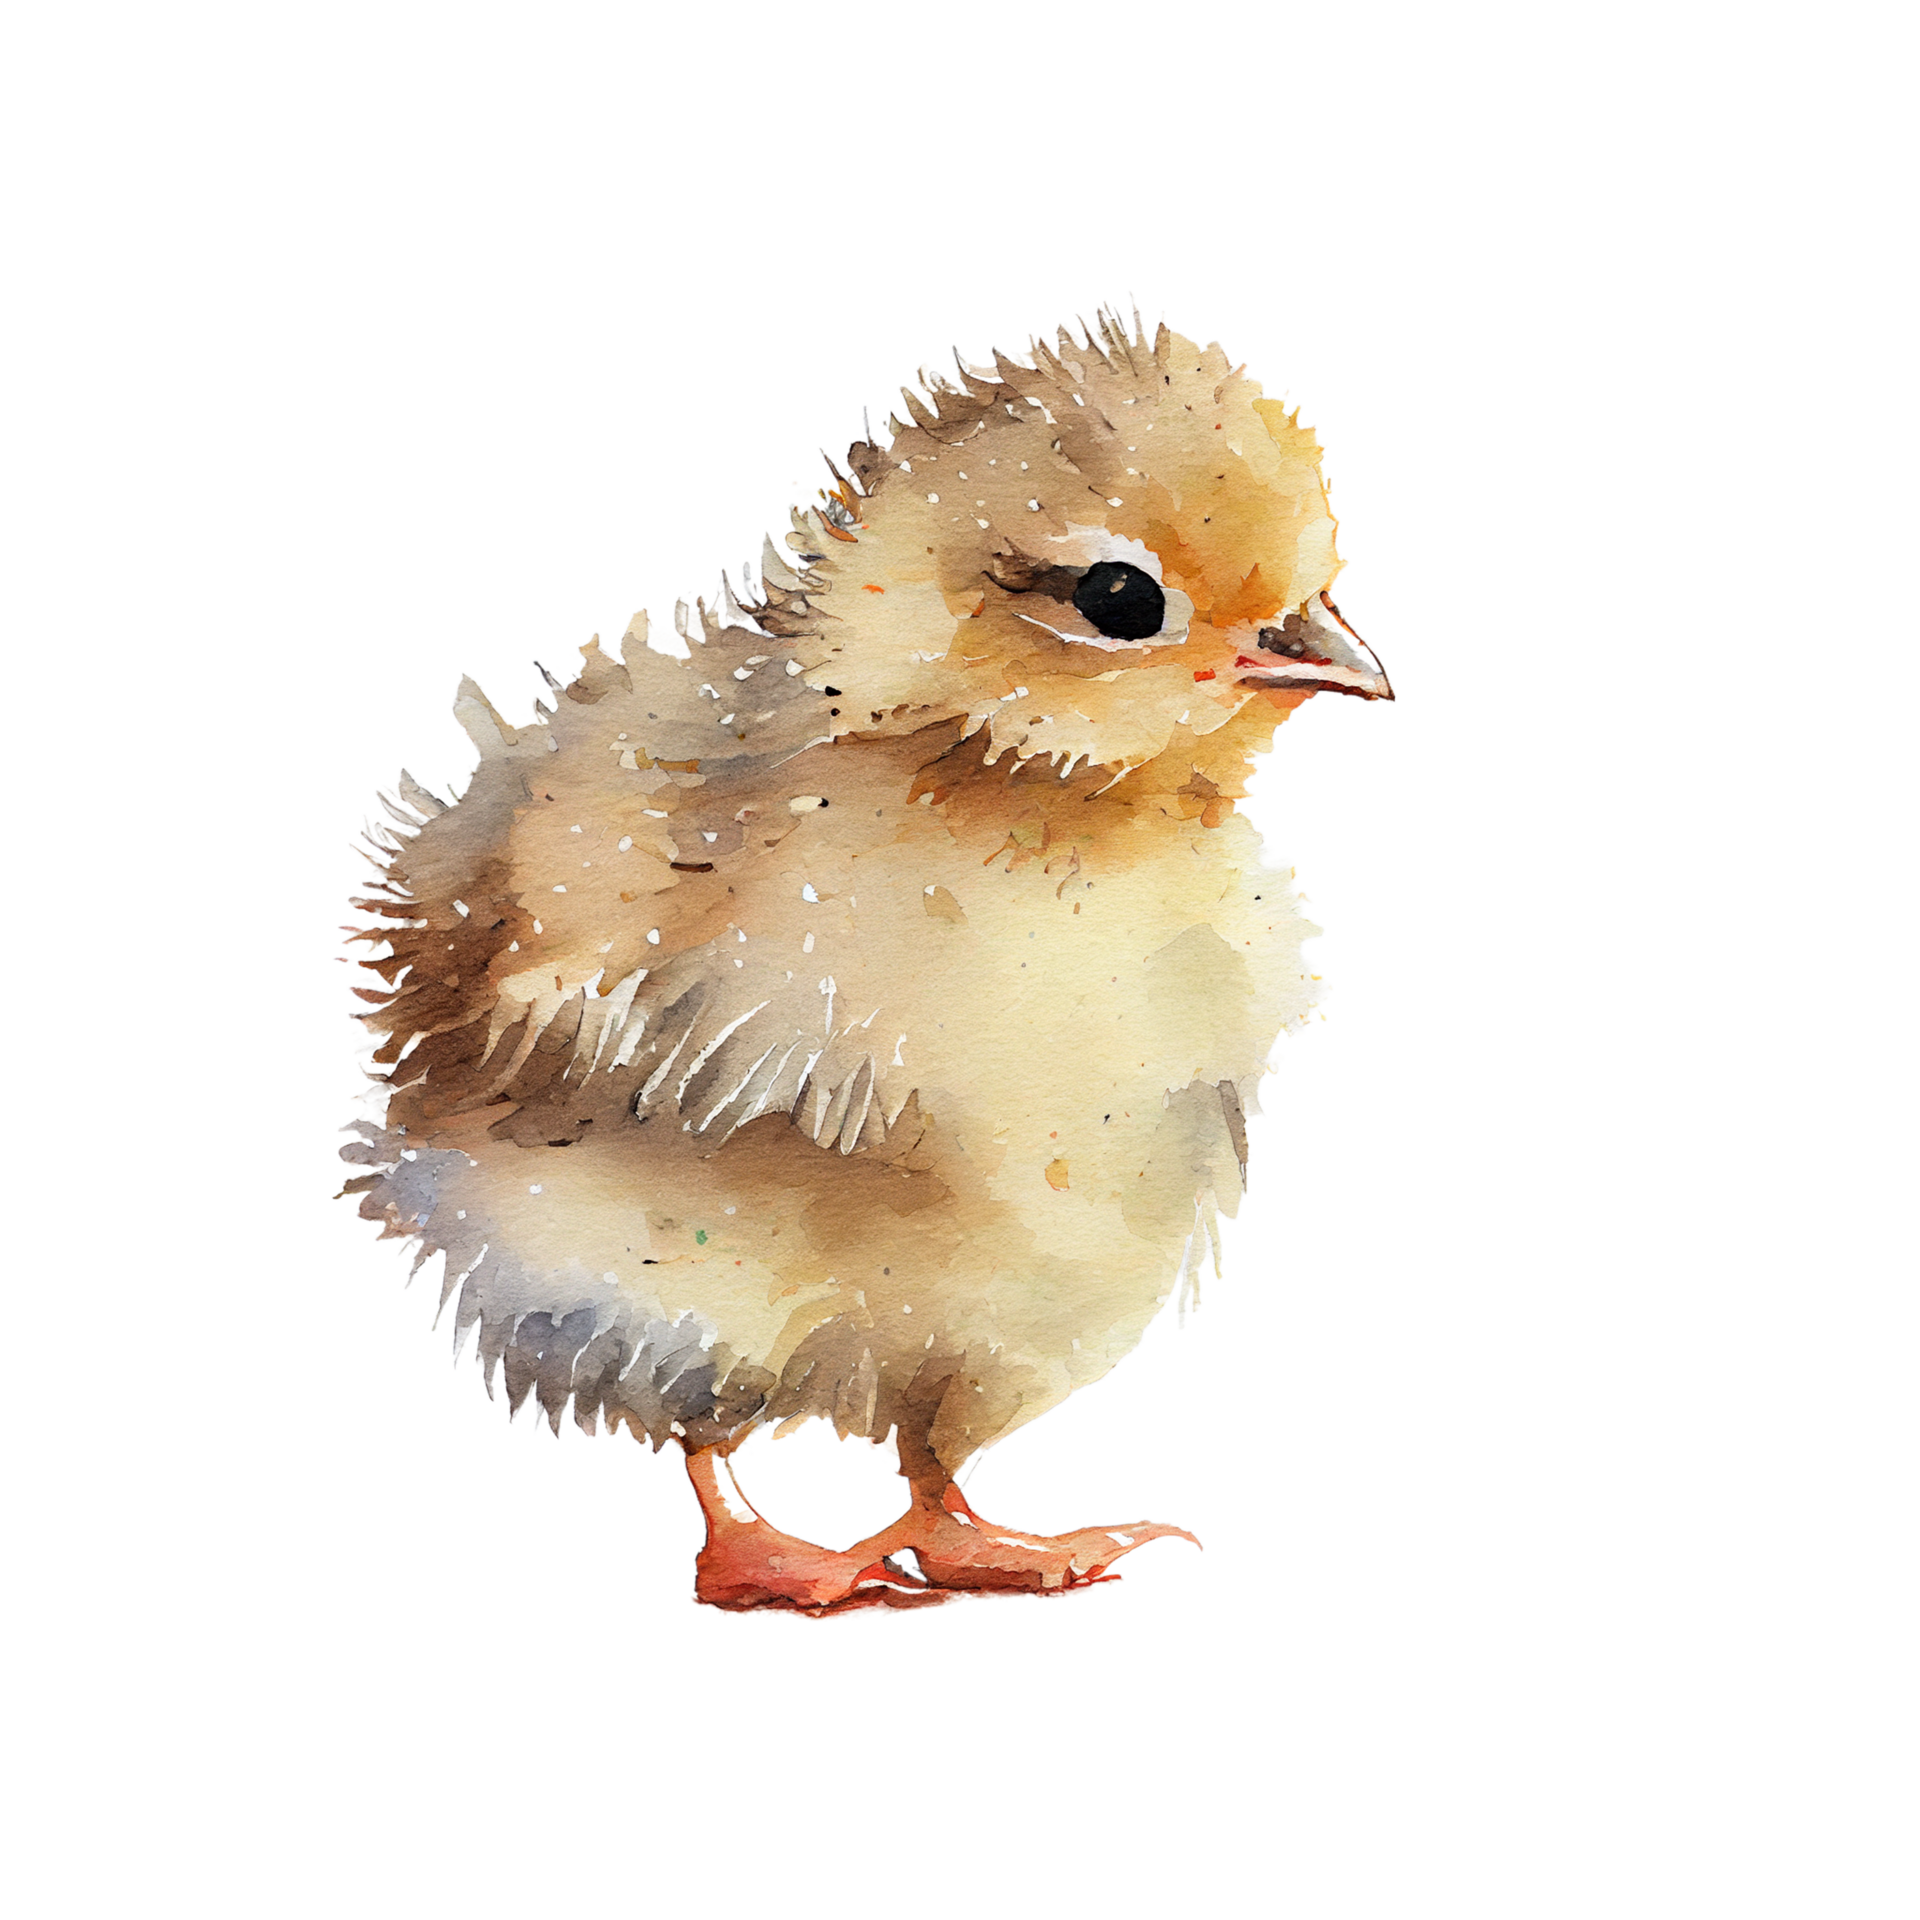 Baby Chicken Drawings